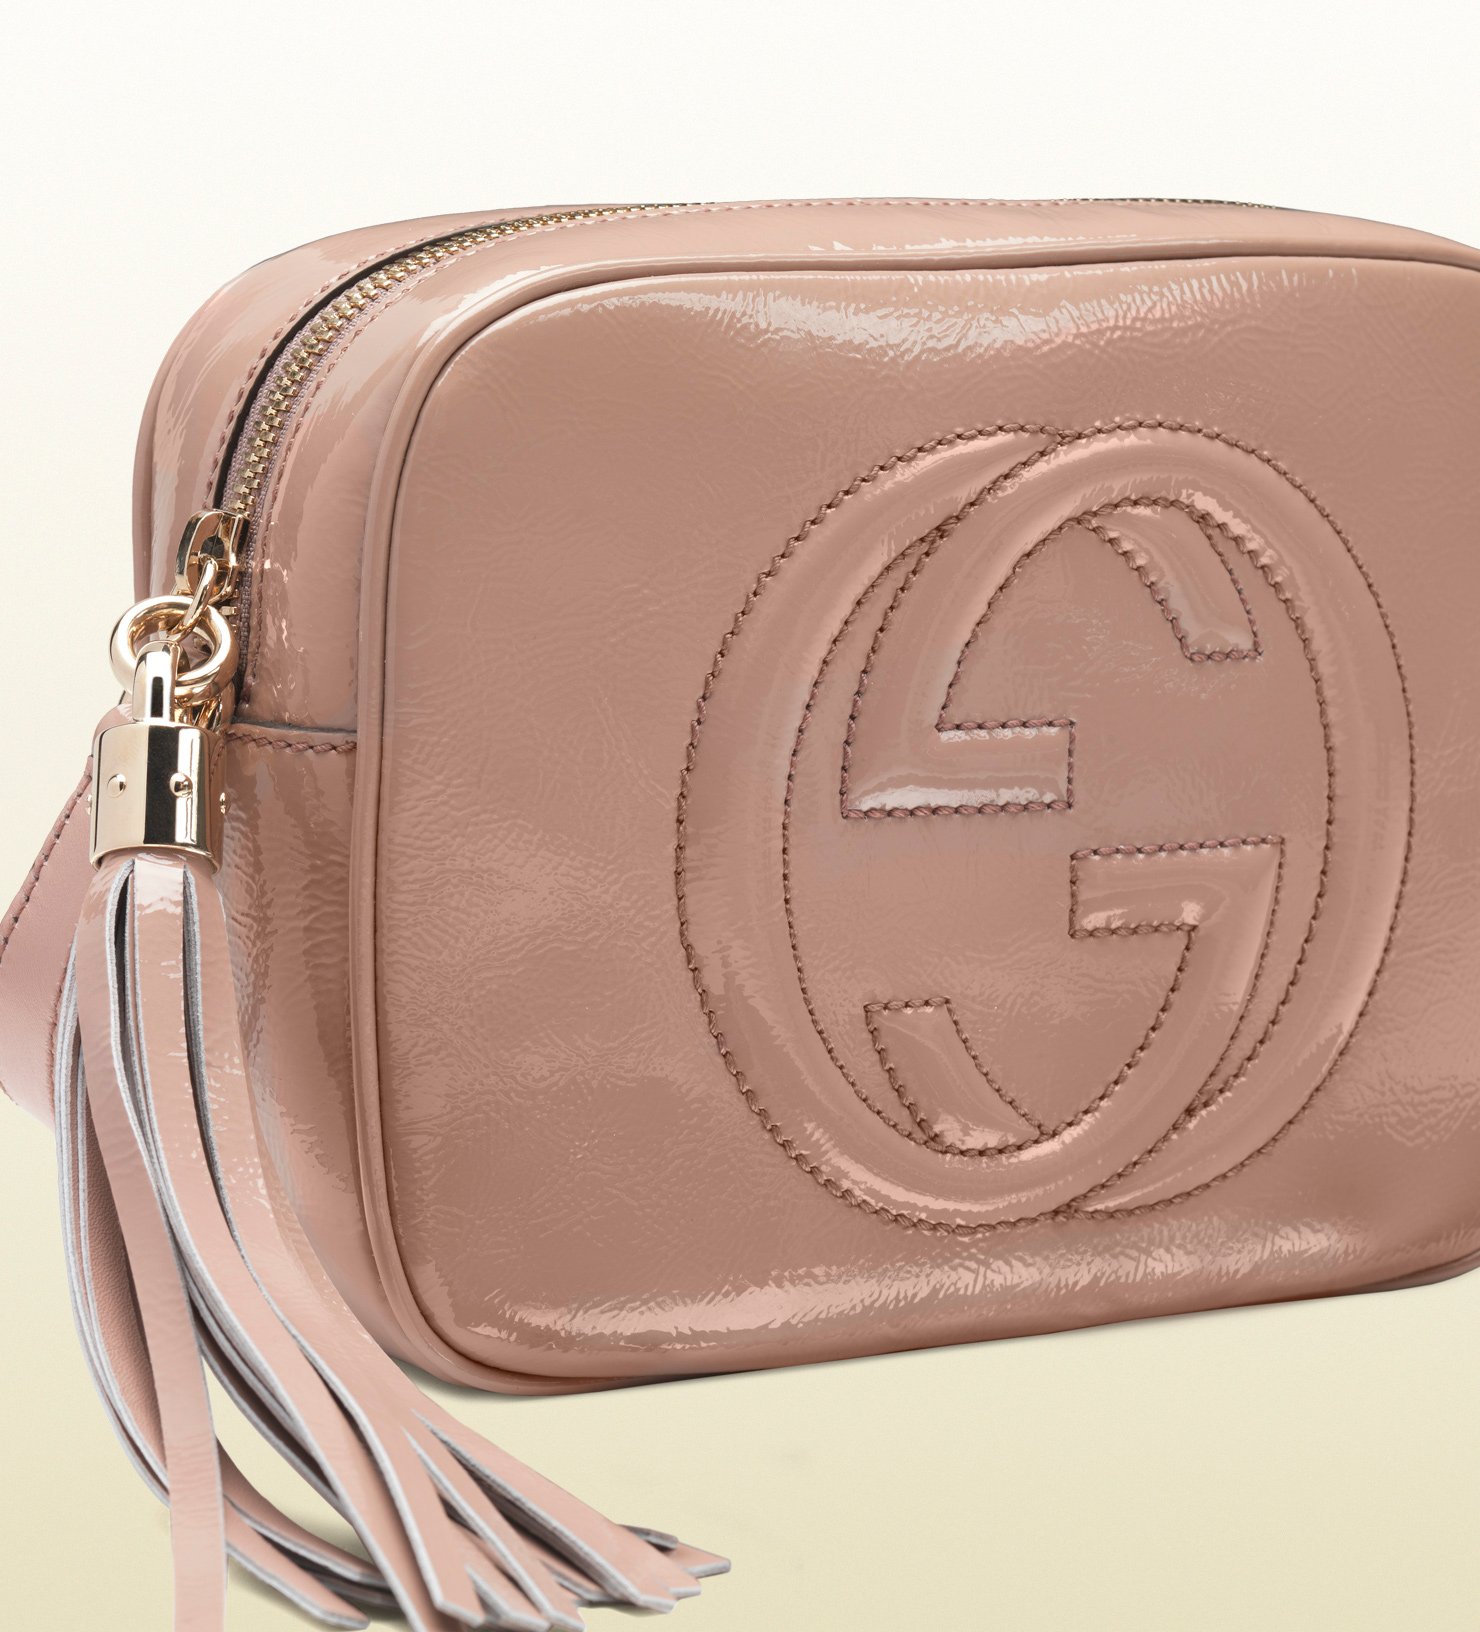 Gucci Soho Patent Leather Disco Bag in Pink - Lyst